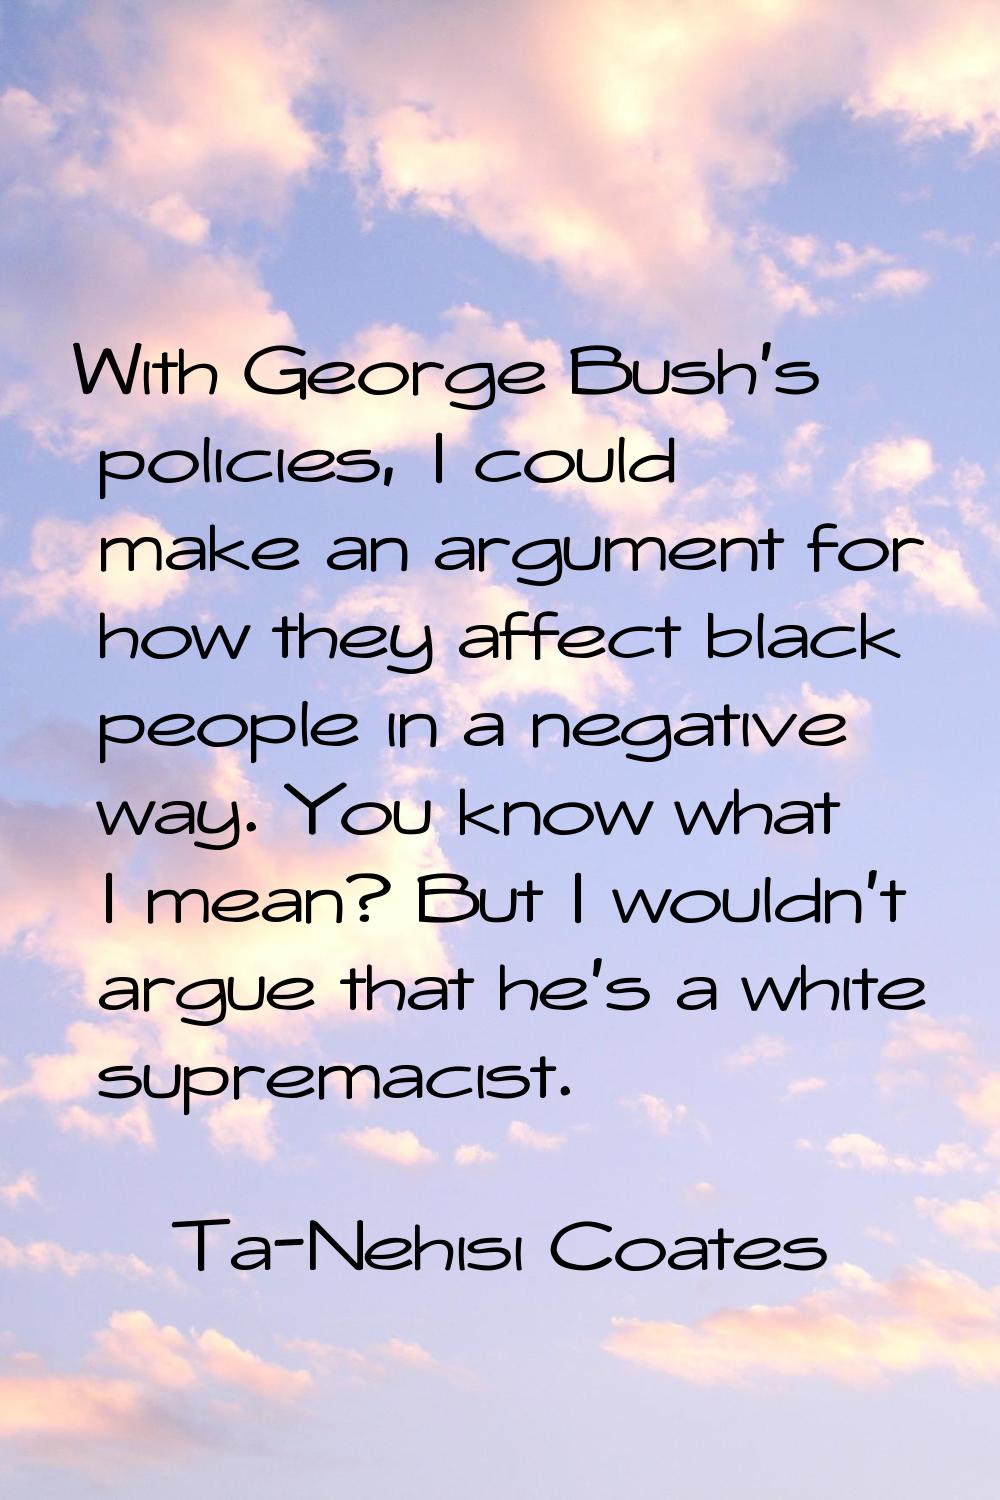 With George Bush's policies, I could make an argument for how they affect black people in a negativ